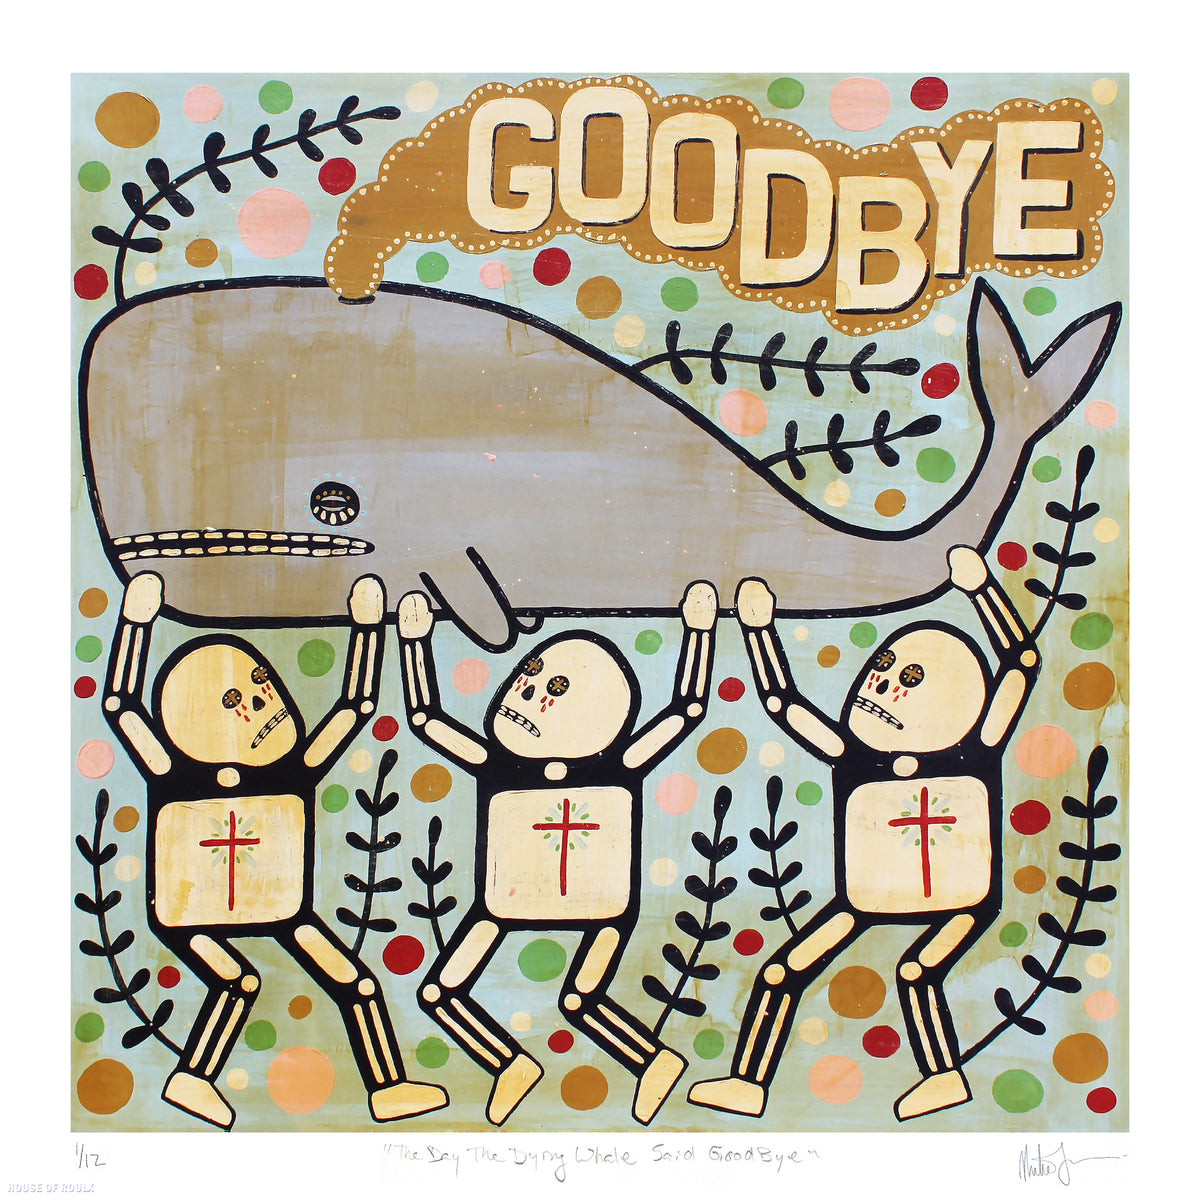 Mike Egan &quot;The Day the Dying Whale Said Goodbye&quot; - Archival Print, Limited Edition of 12 - 17 x 17&quot;